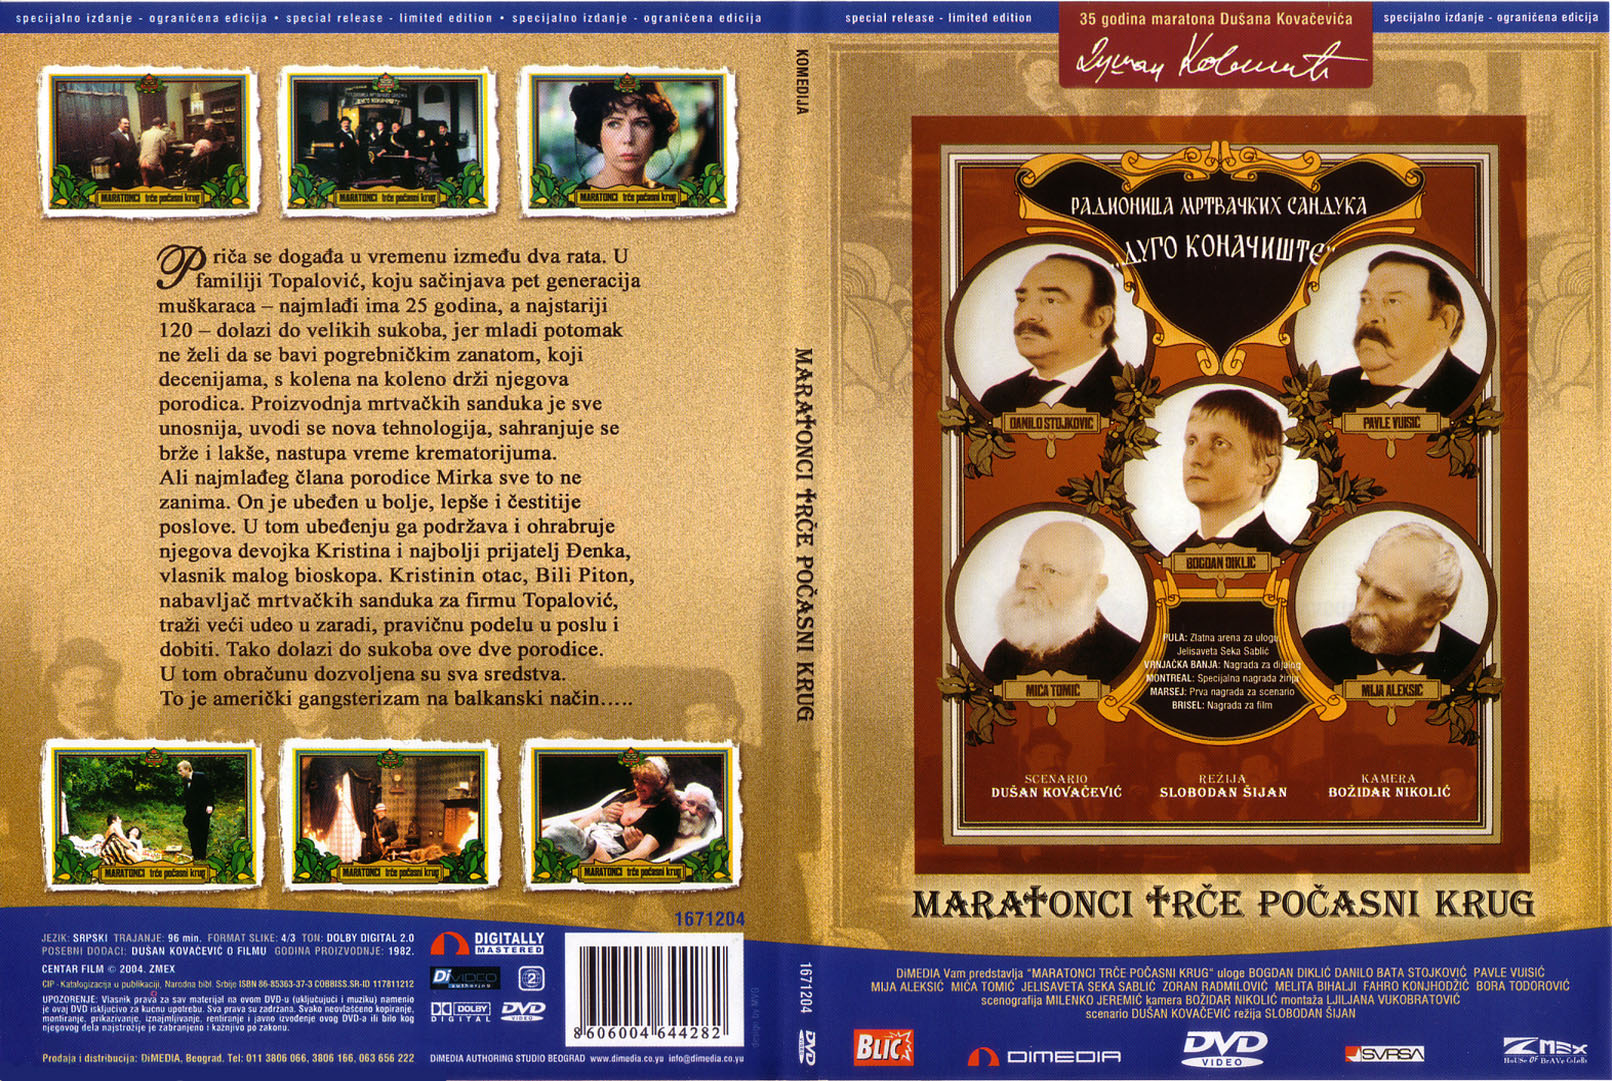 Click to view full size image -  DVD Cover - 0-9 - maratonci_trce_pocasni_krug_dvd - maratonci_trce_pocasni_krug_dvd.jpg